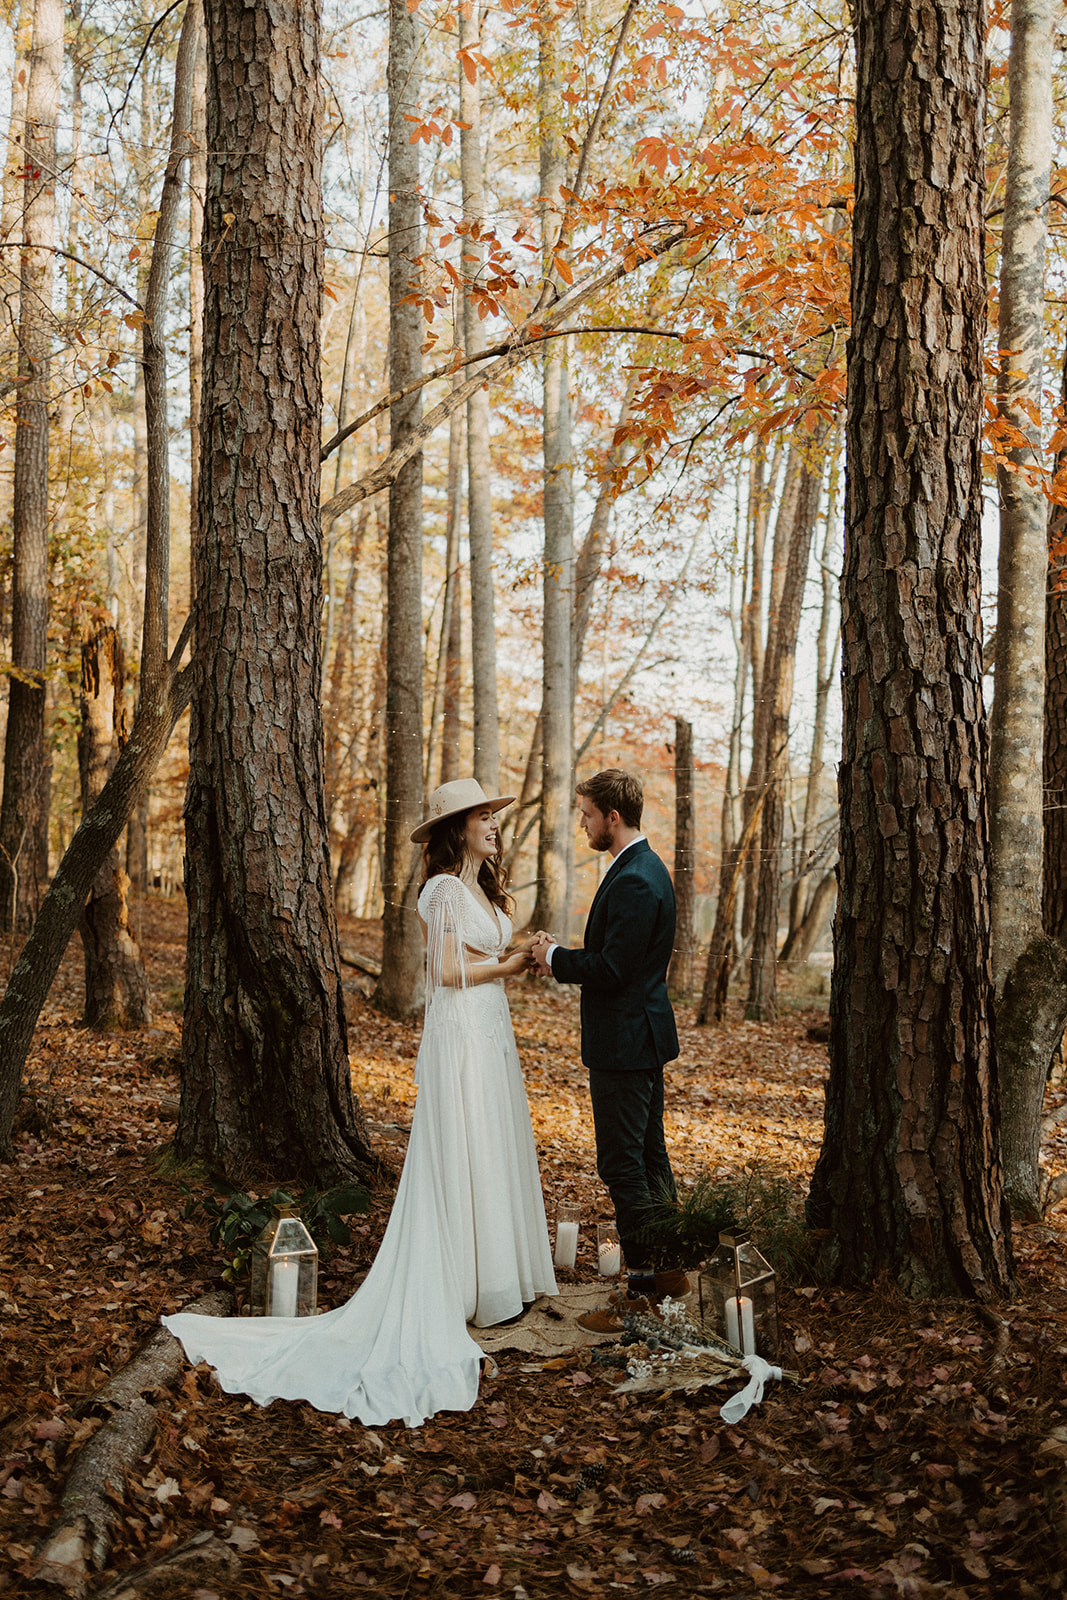 the couple standing together in the woods during their fall elopement in Georgia